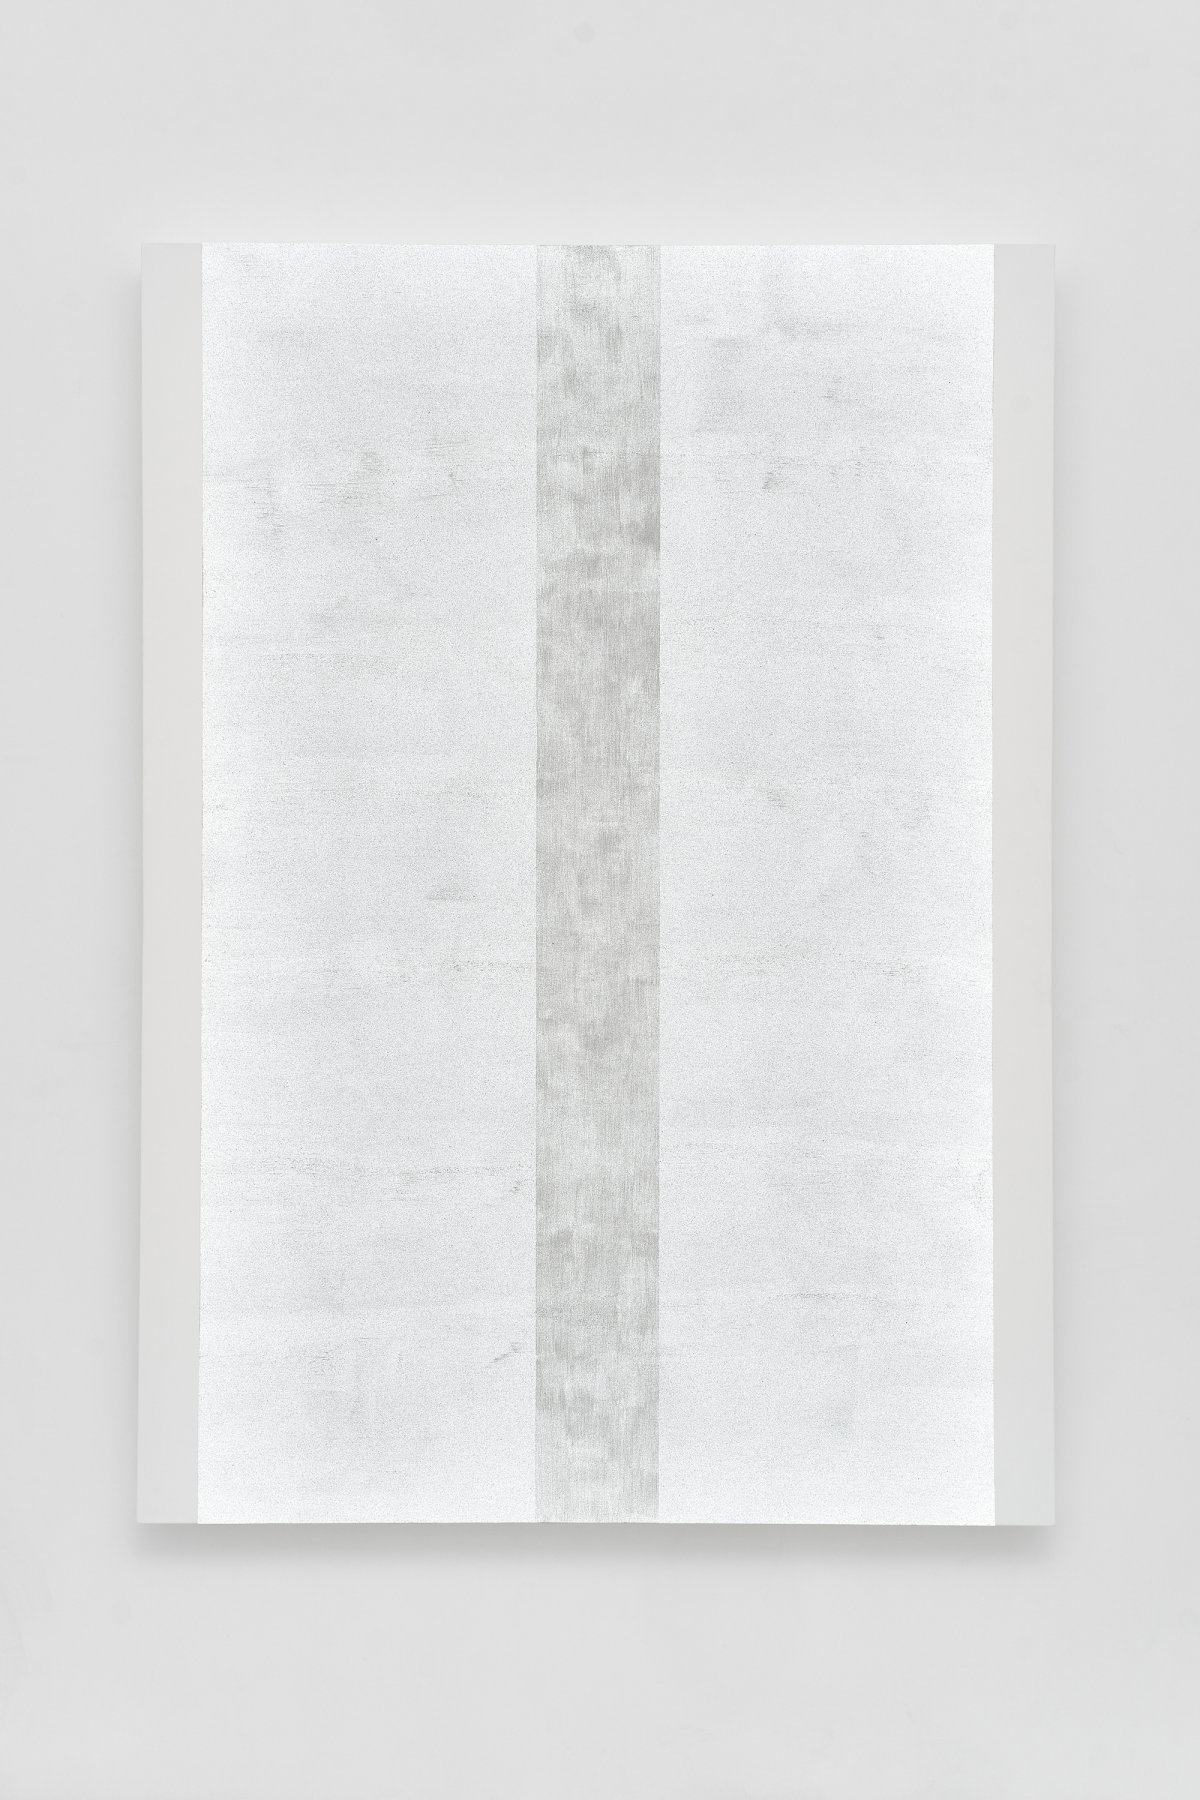 Mary Corse, Untitled (White Inner Band with  White Sides, Beveled), 2023